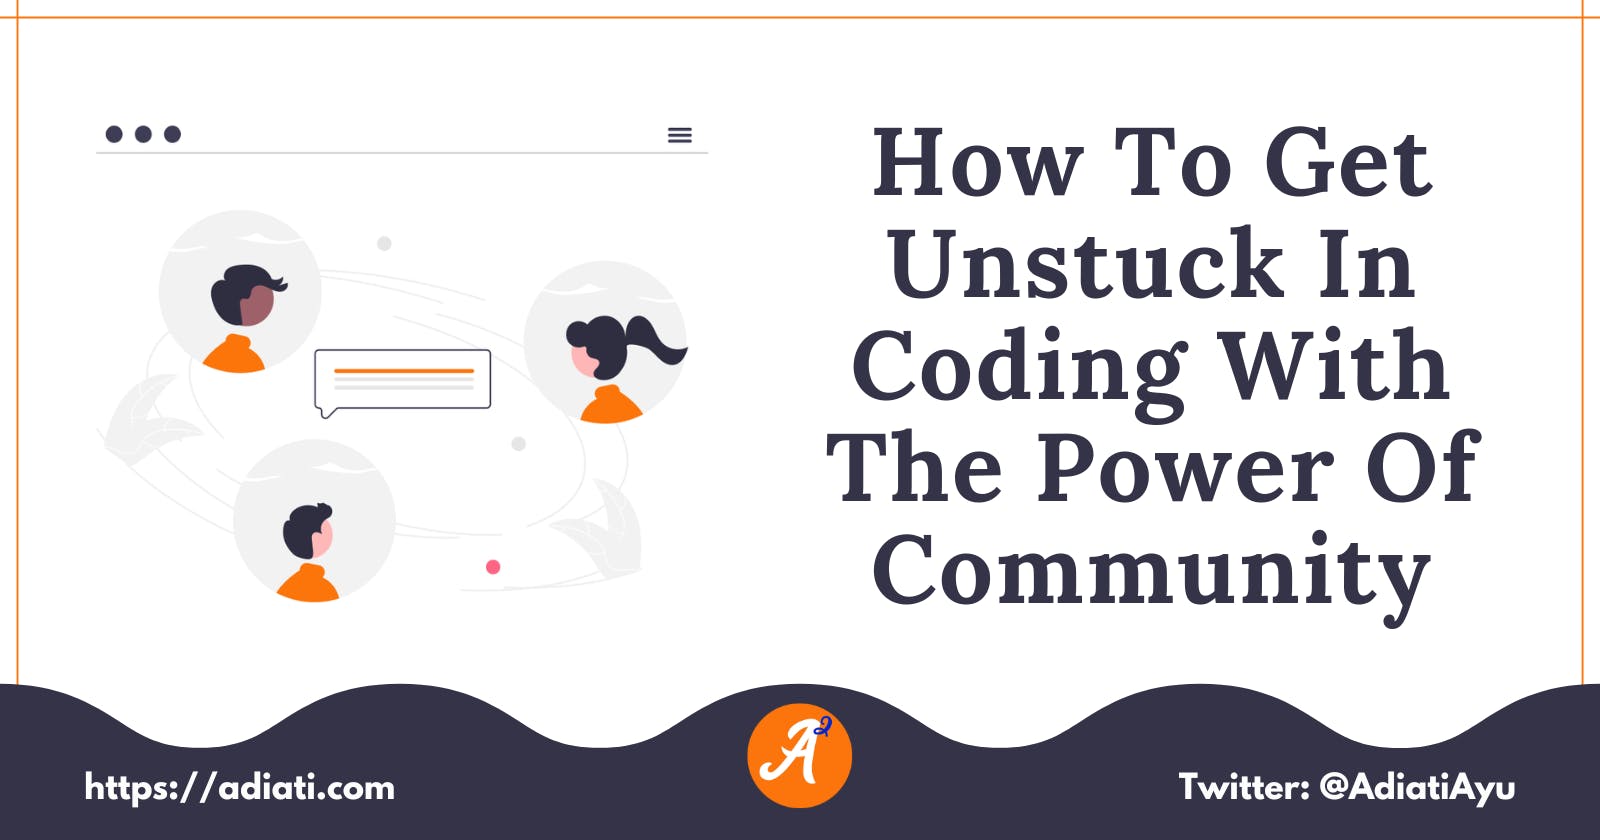 How To Get Unstuck In Coding With The Power Of Community